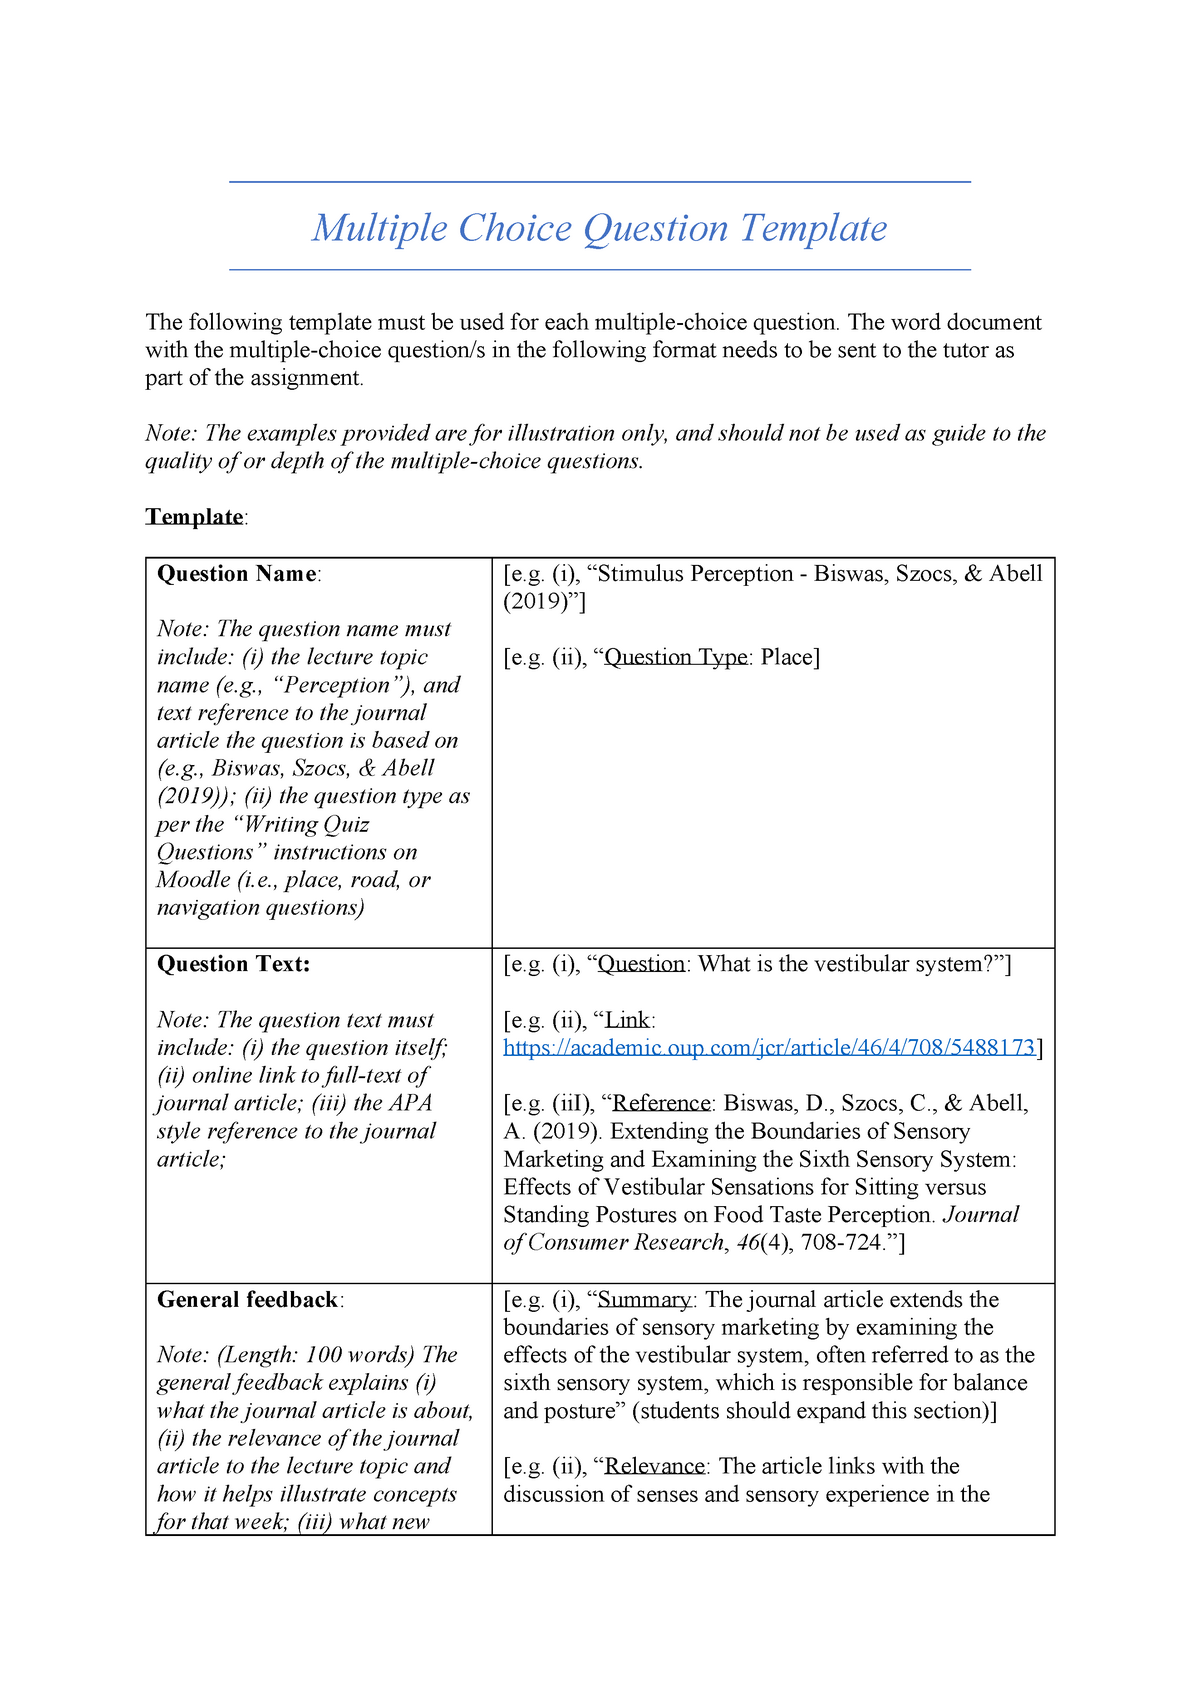 multiple-choice-question-template-the-word-document-with-the-multiple